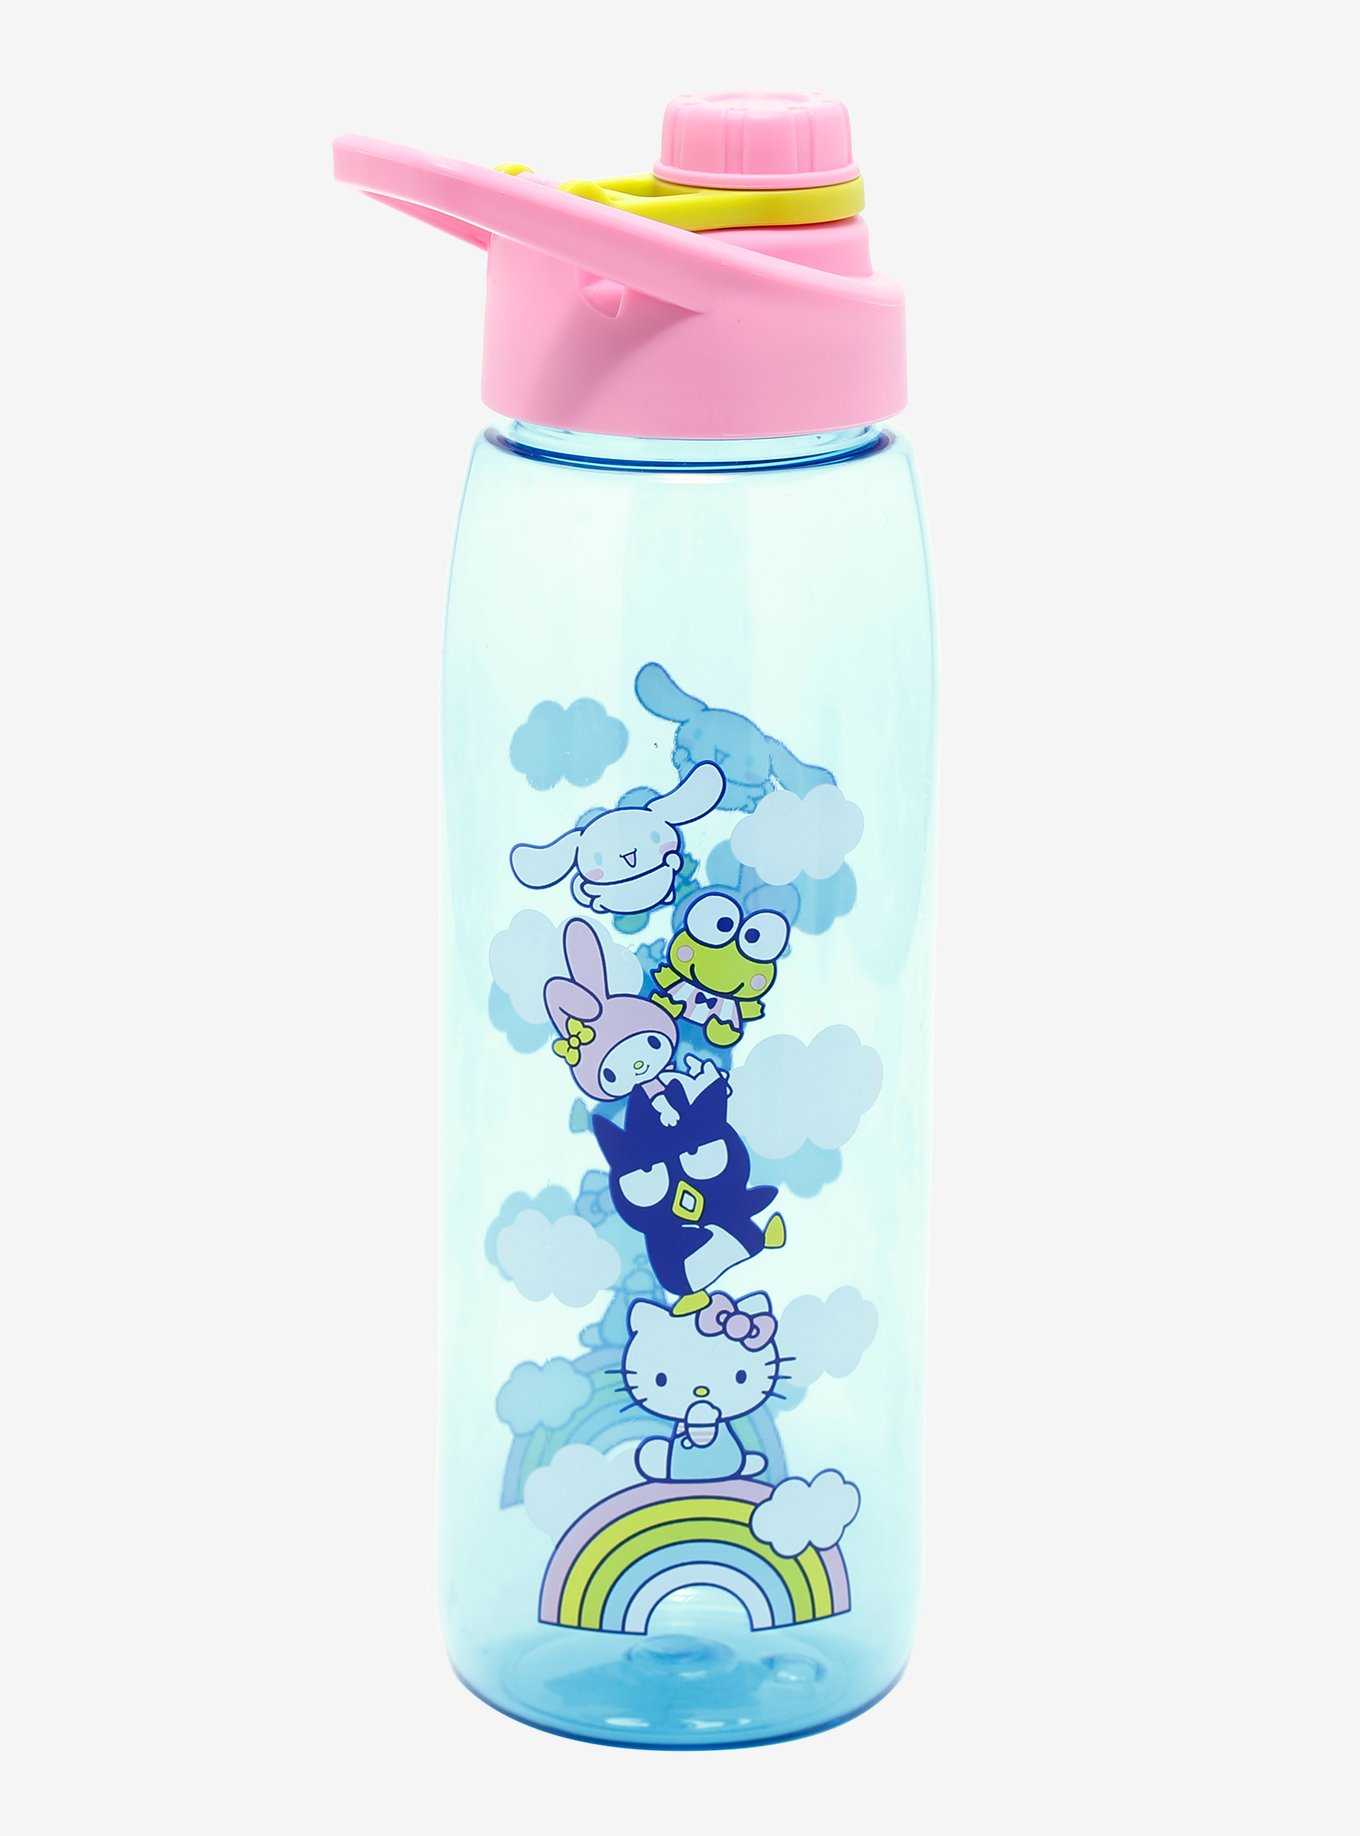 Ghost-Spider Stainless Steel Water Bottle with Sleeve